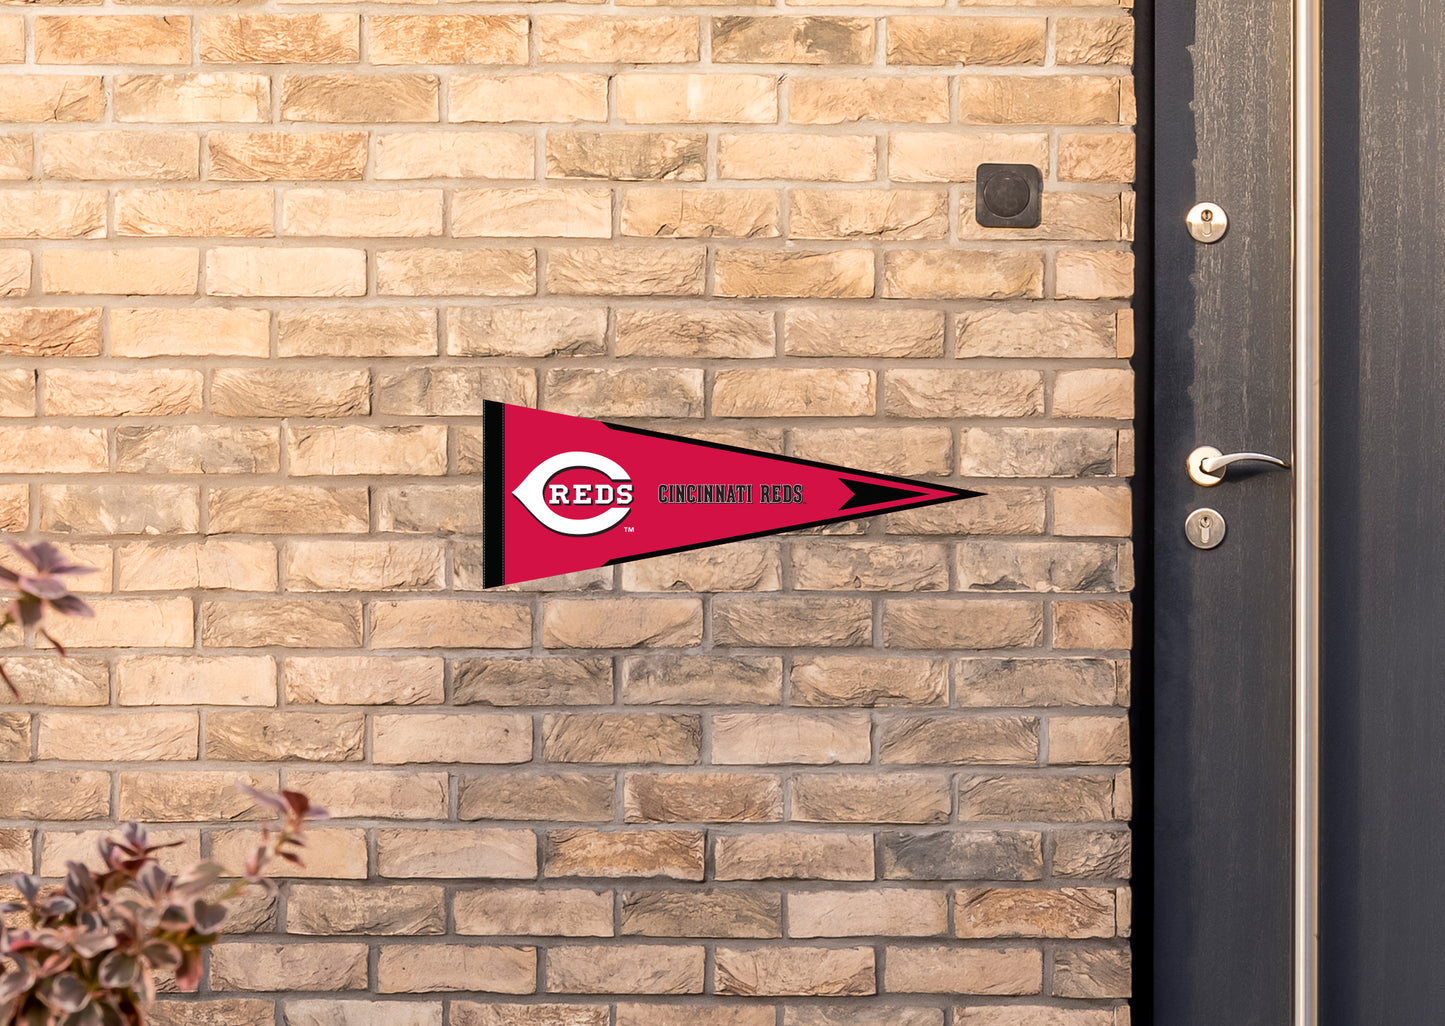 Cincinnati Reds: Pennant - Officially Licensed MLB Outdoor Graphic